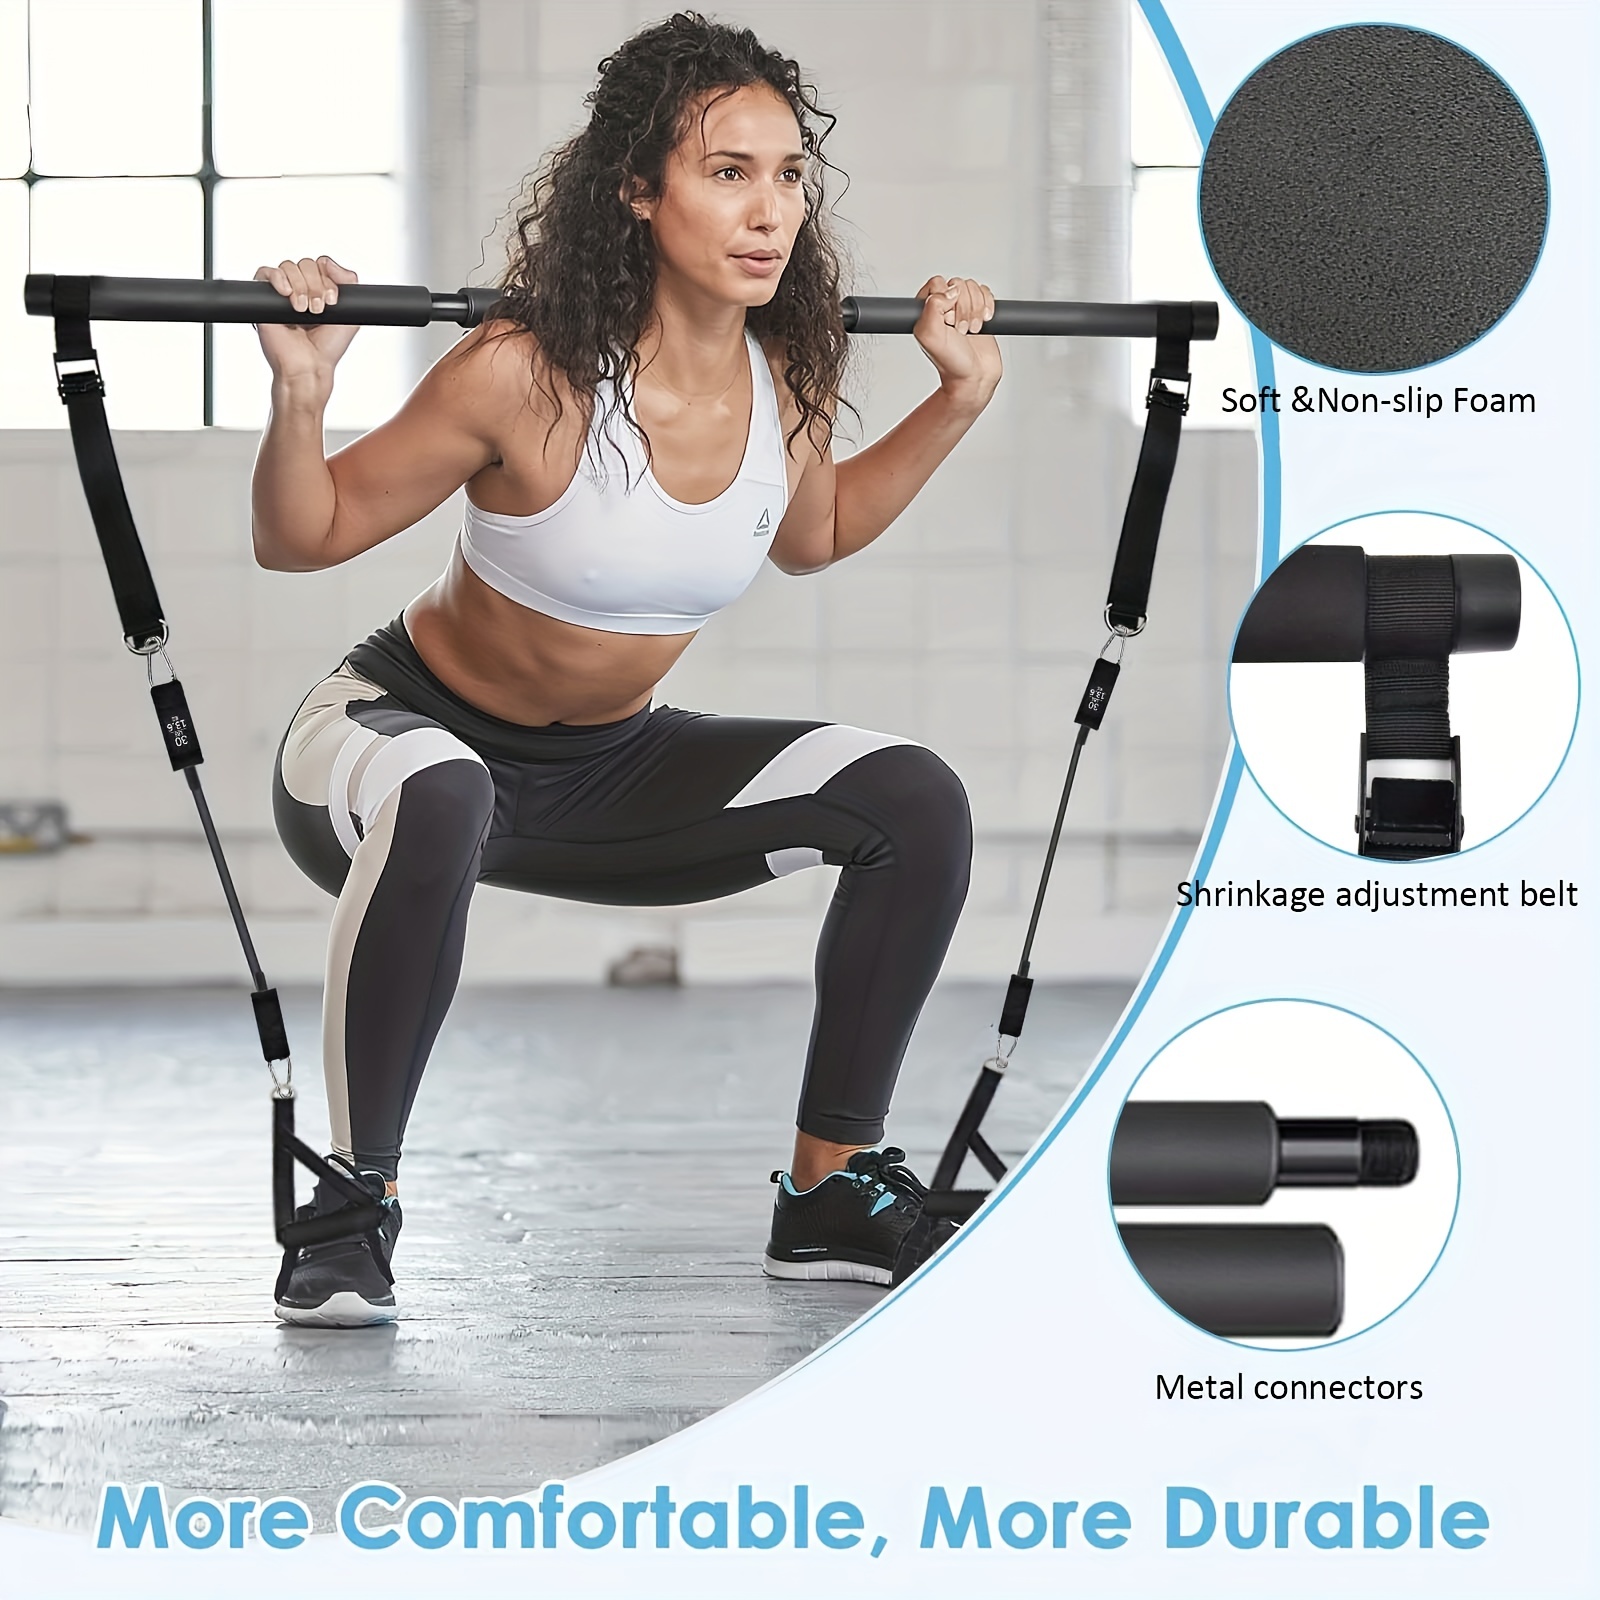 Upgraded Portable Pilates Bar Kit - Adjustable 39 Inches 3 Section Pilates  Bar with Resistance Bands 20, 30, 40 Lbs. Home Workout Equipment for Women  with 2 Foot & Hand Loops for